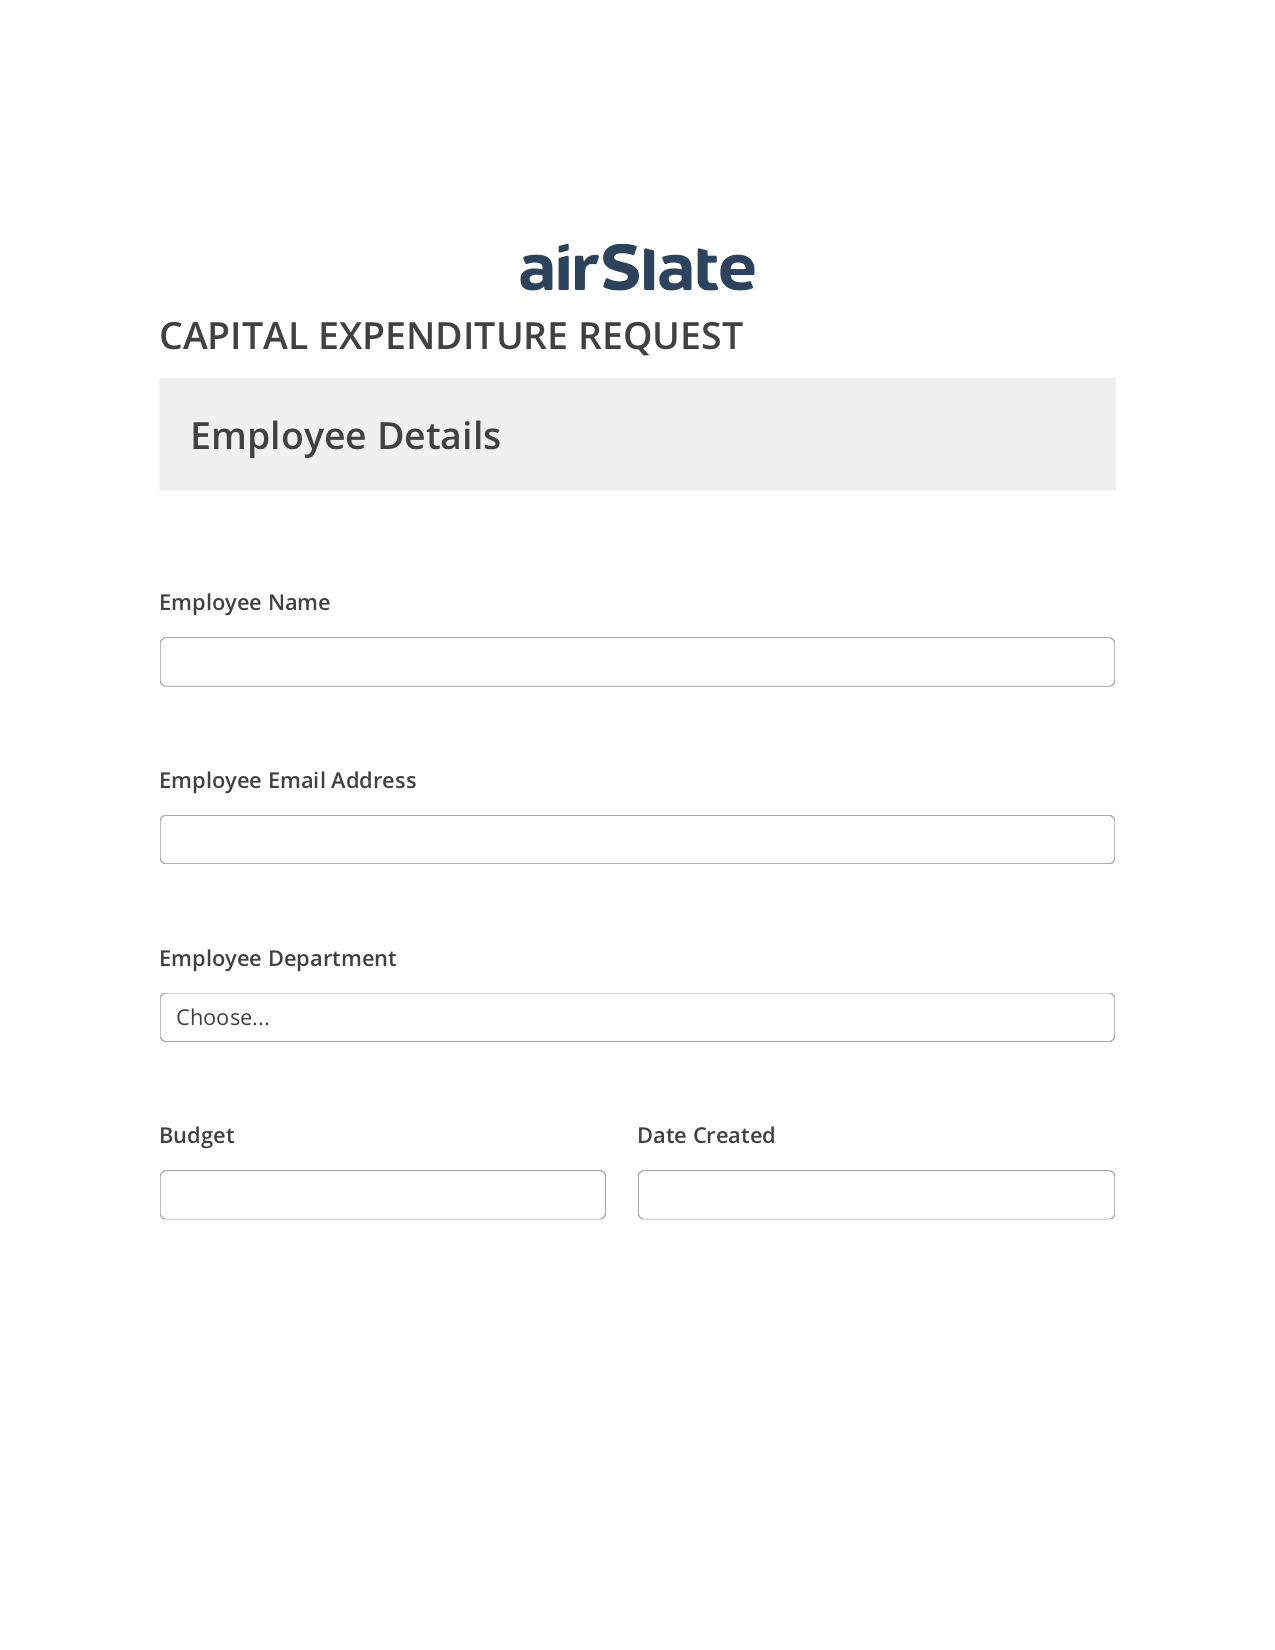 Multirole Capital Expenditure Request Approval Workflow Pre-fill from CSV File Bot, Create Slate Reminder Bot, Archive to SharePoint Folder Bot